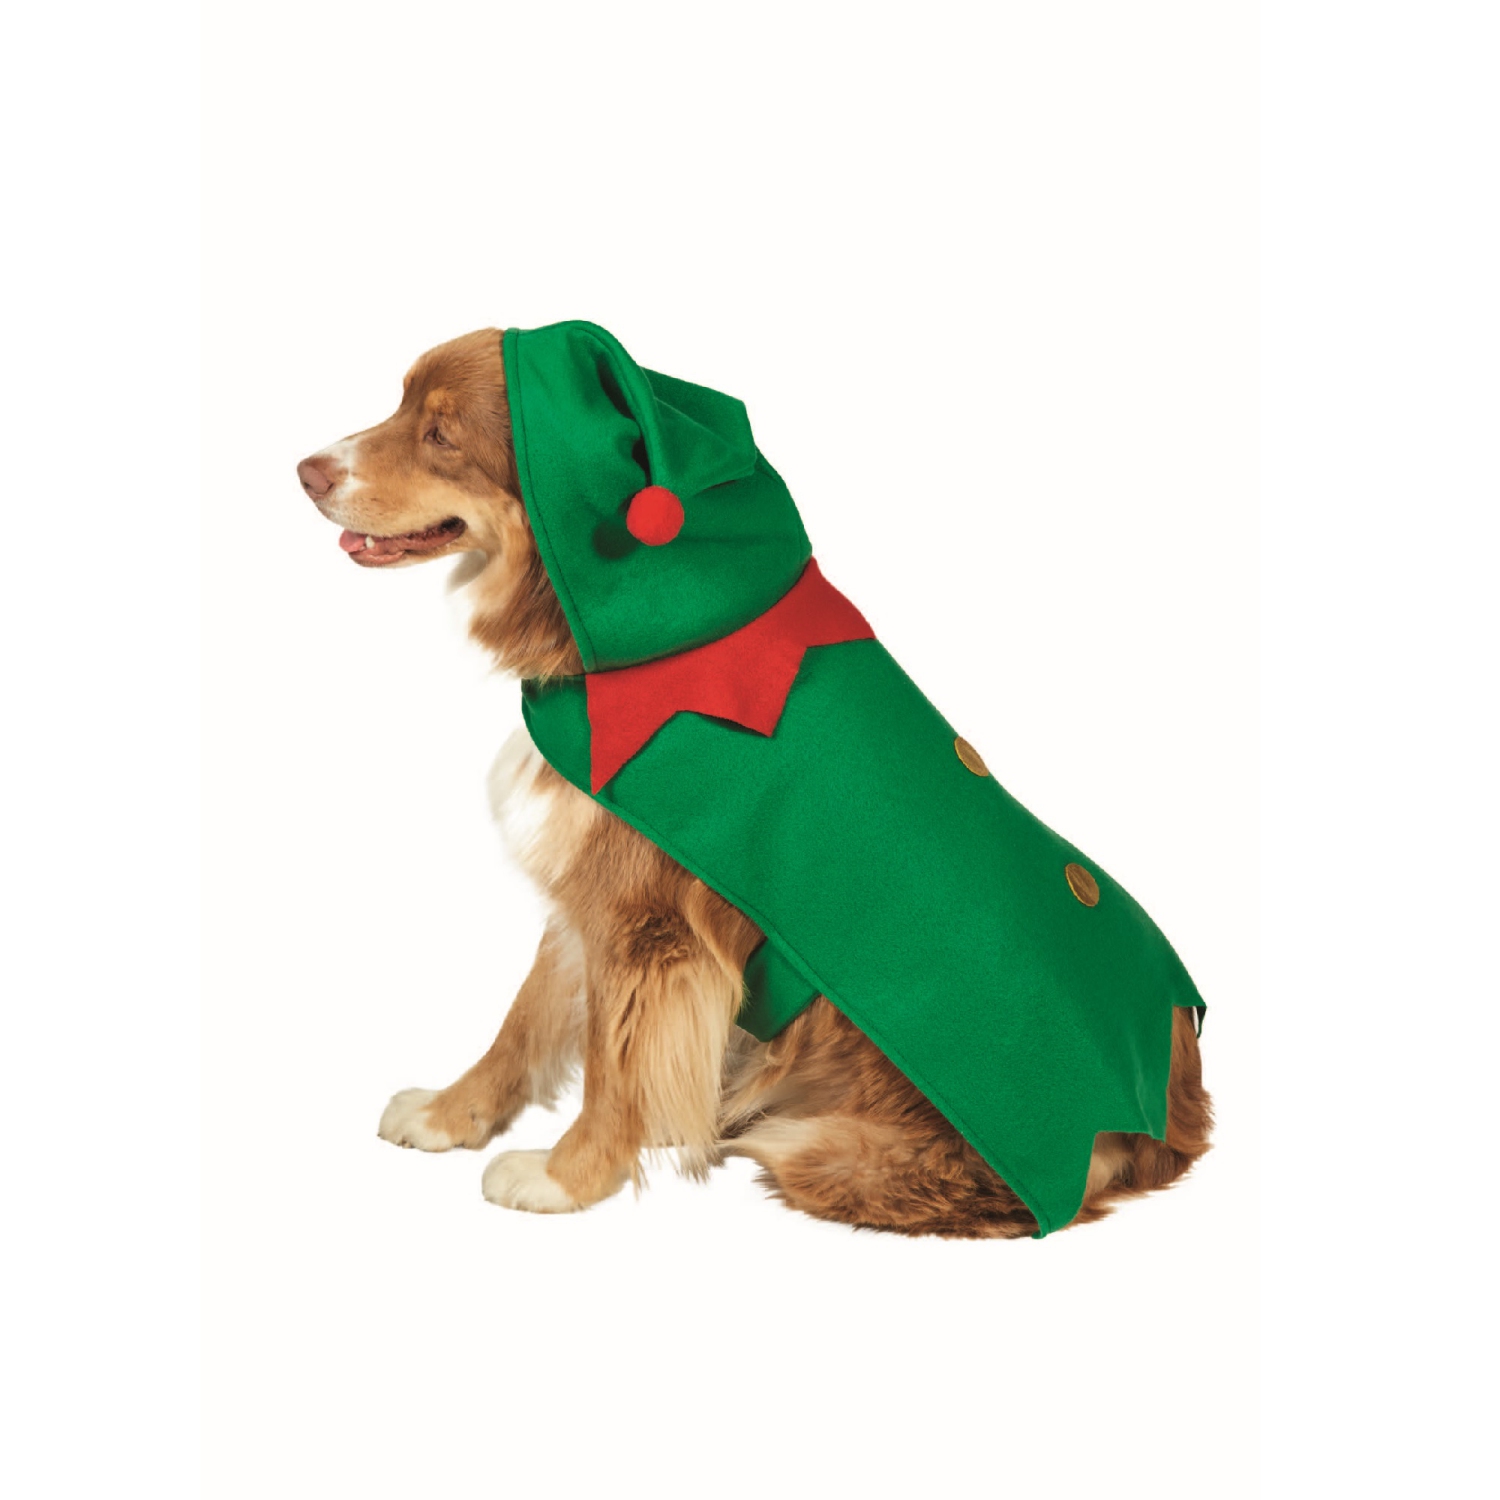 27" Green and Red Christmas Elf Dog Costume - Size L